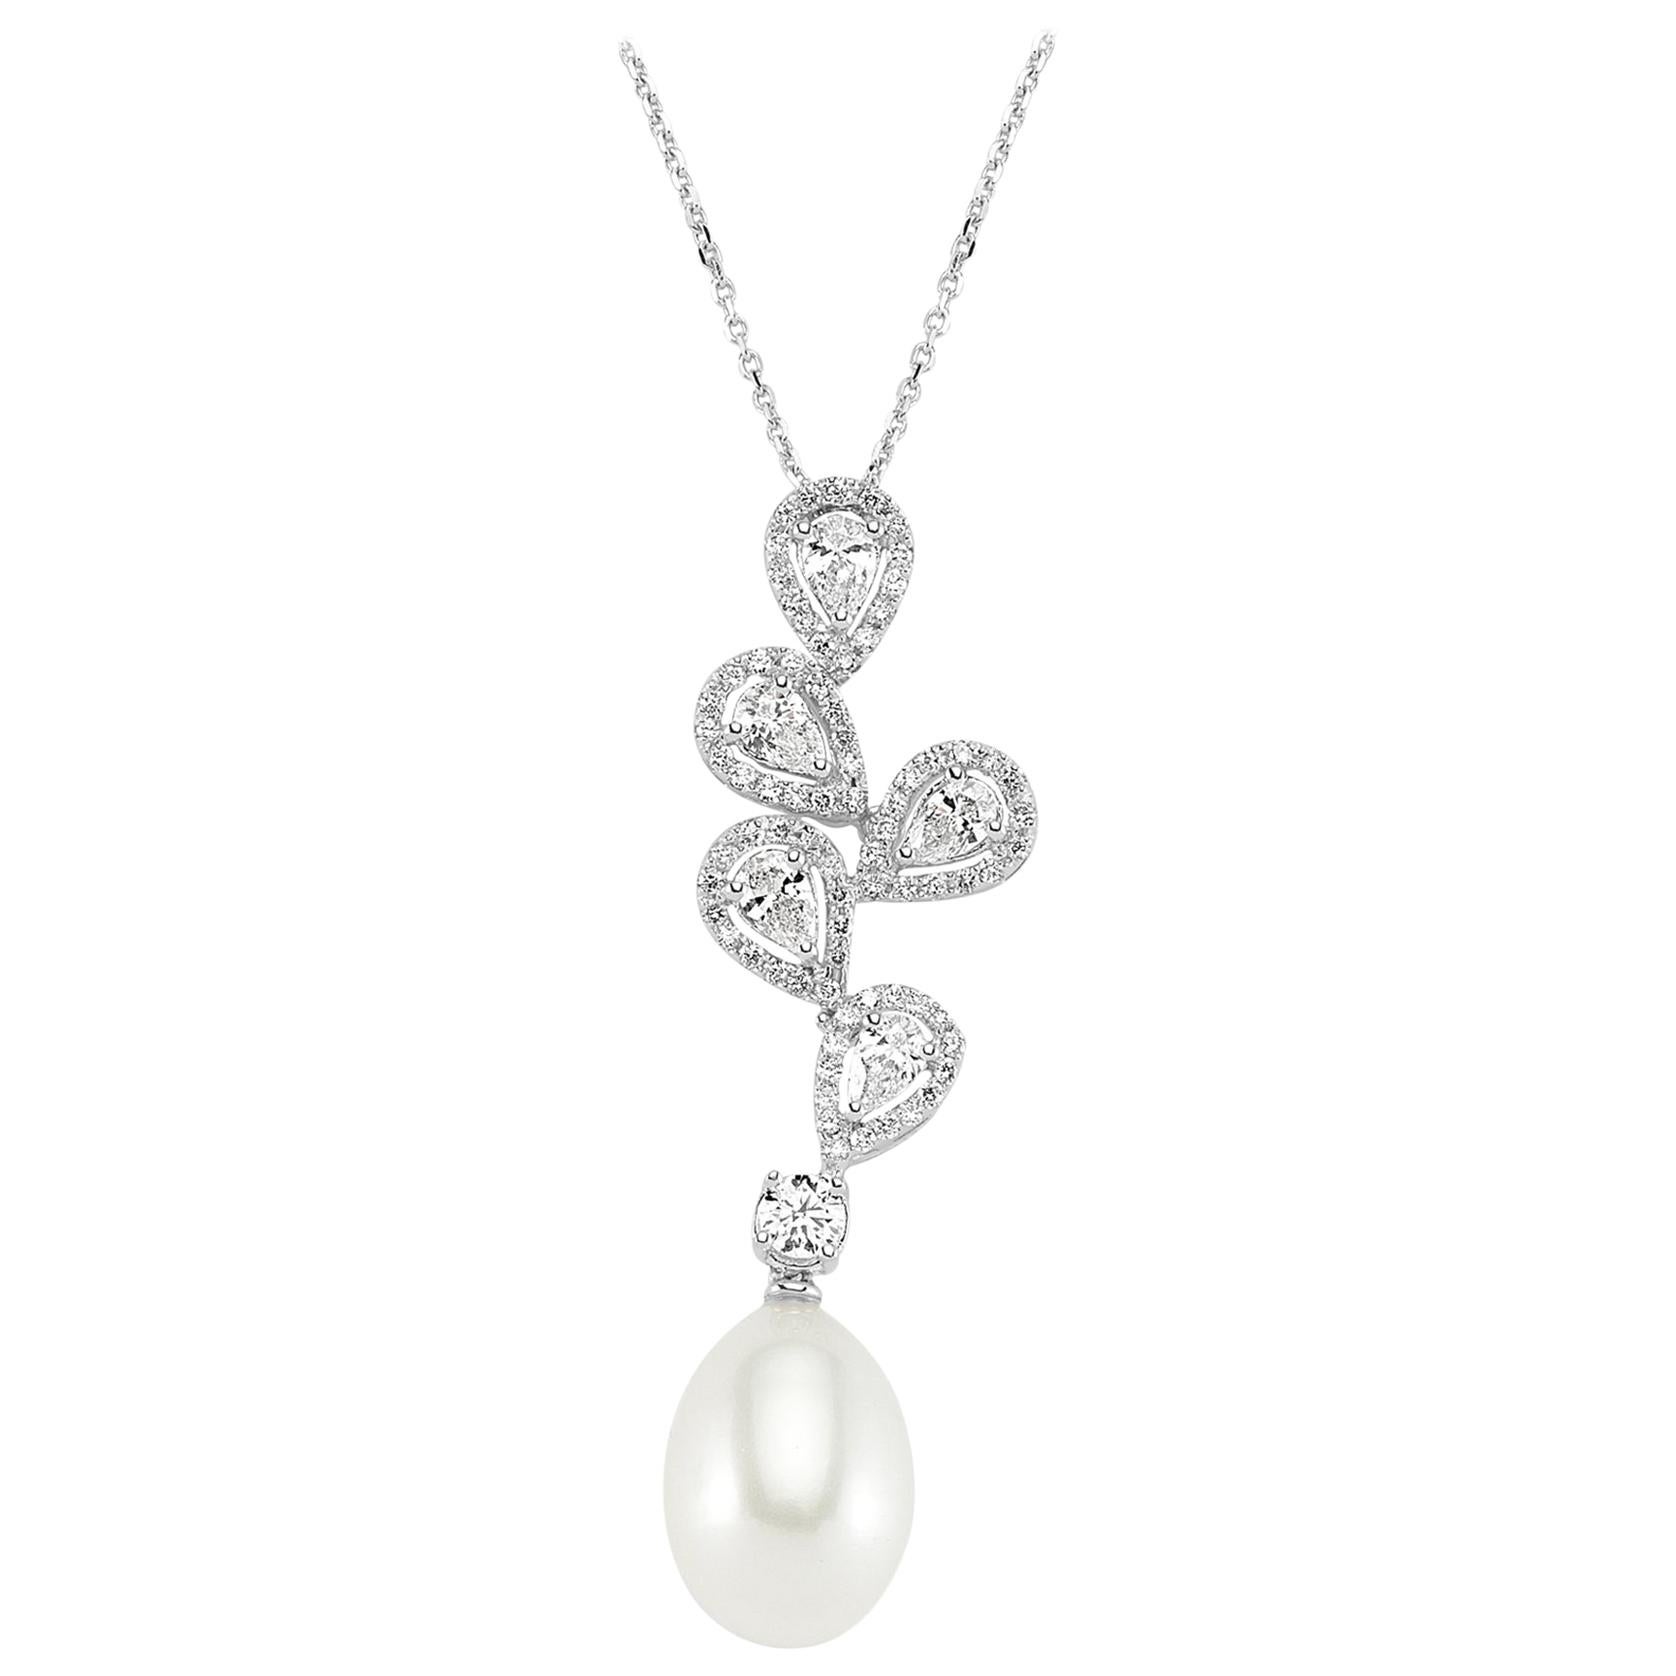 OWN Your Story 18K White Gold 4 Petalled Fresh Water Pearl Flower Drop Necklace